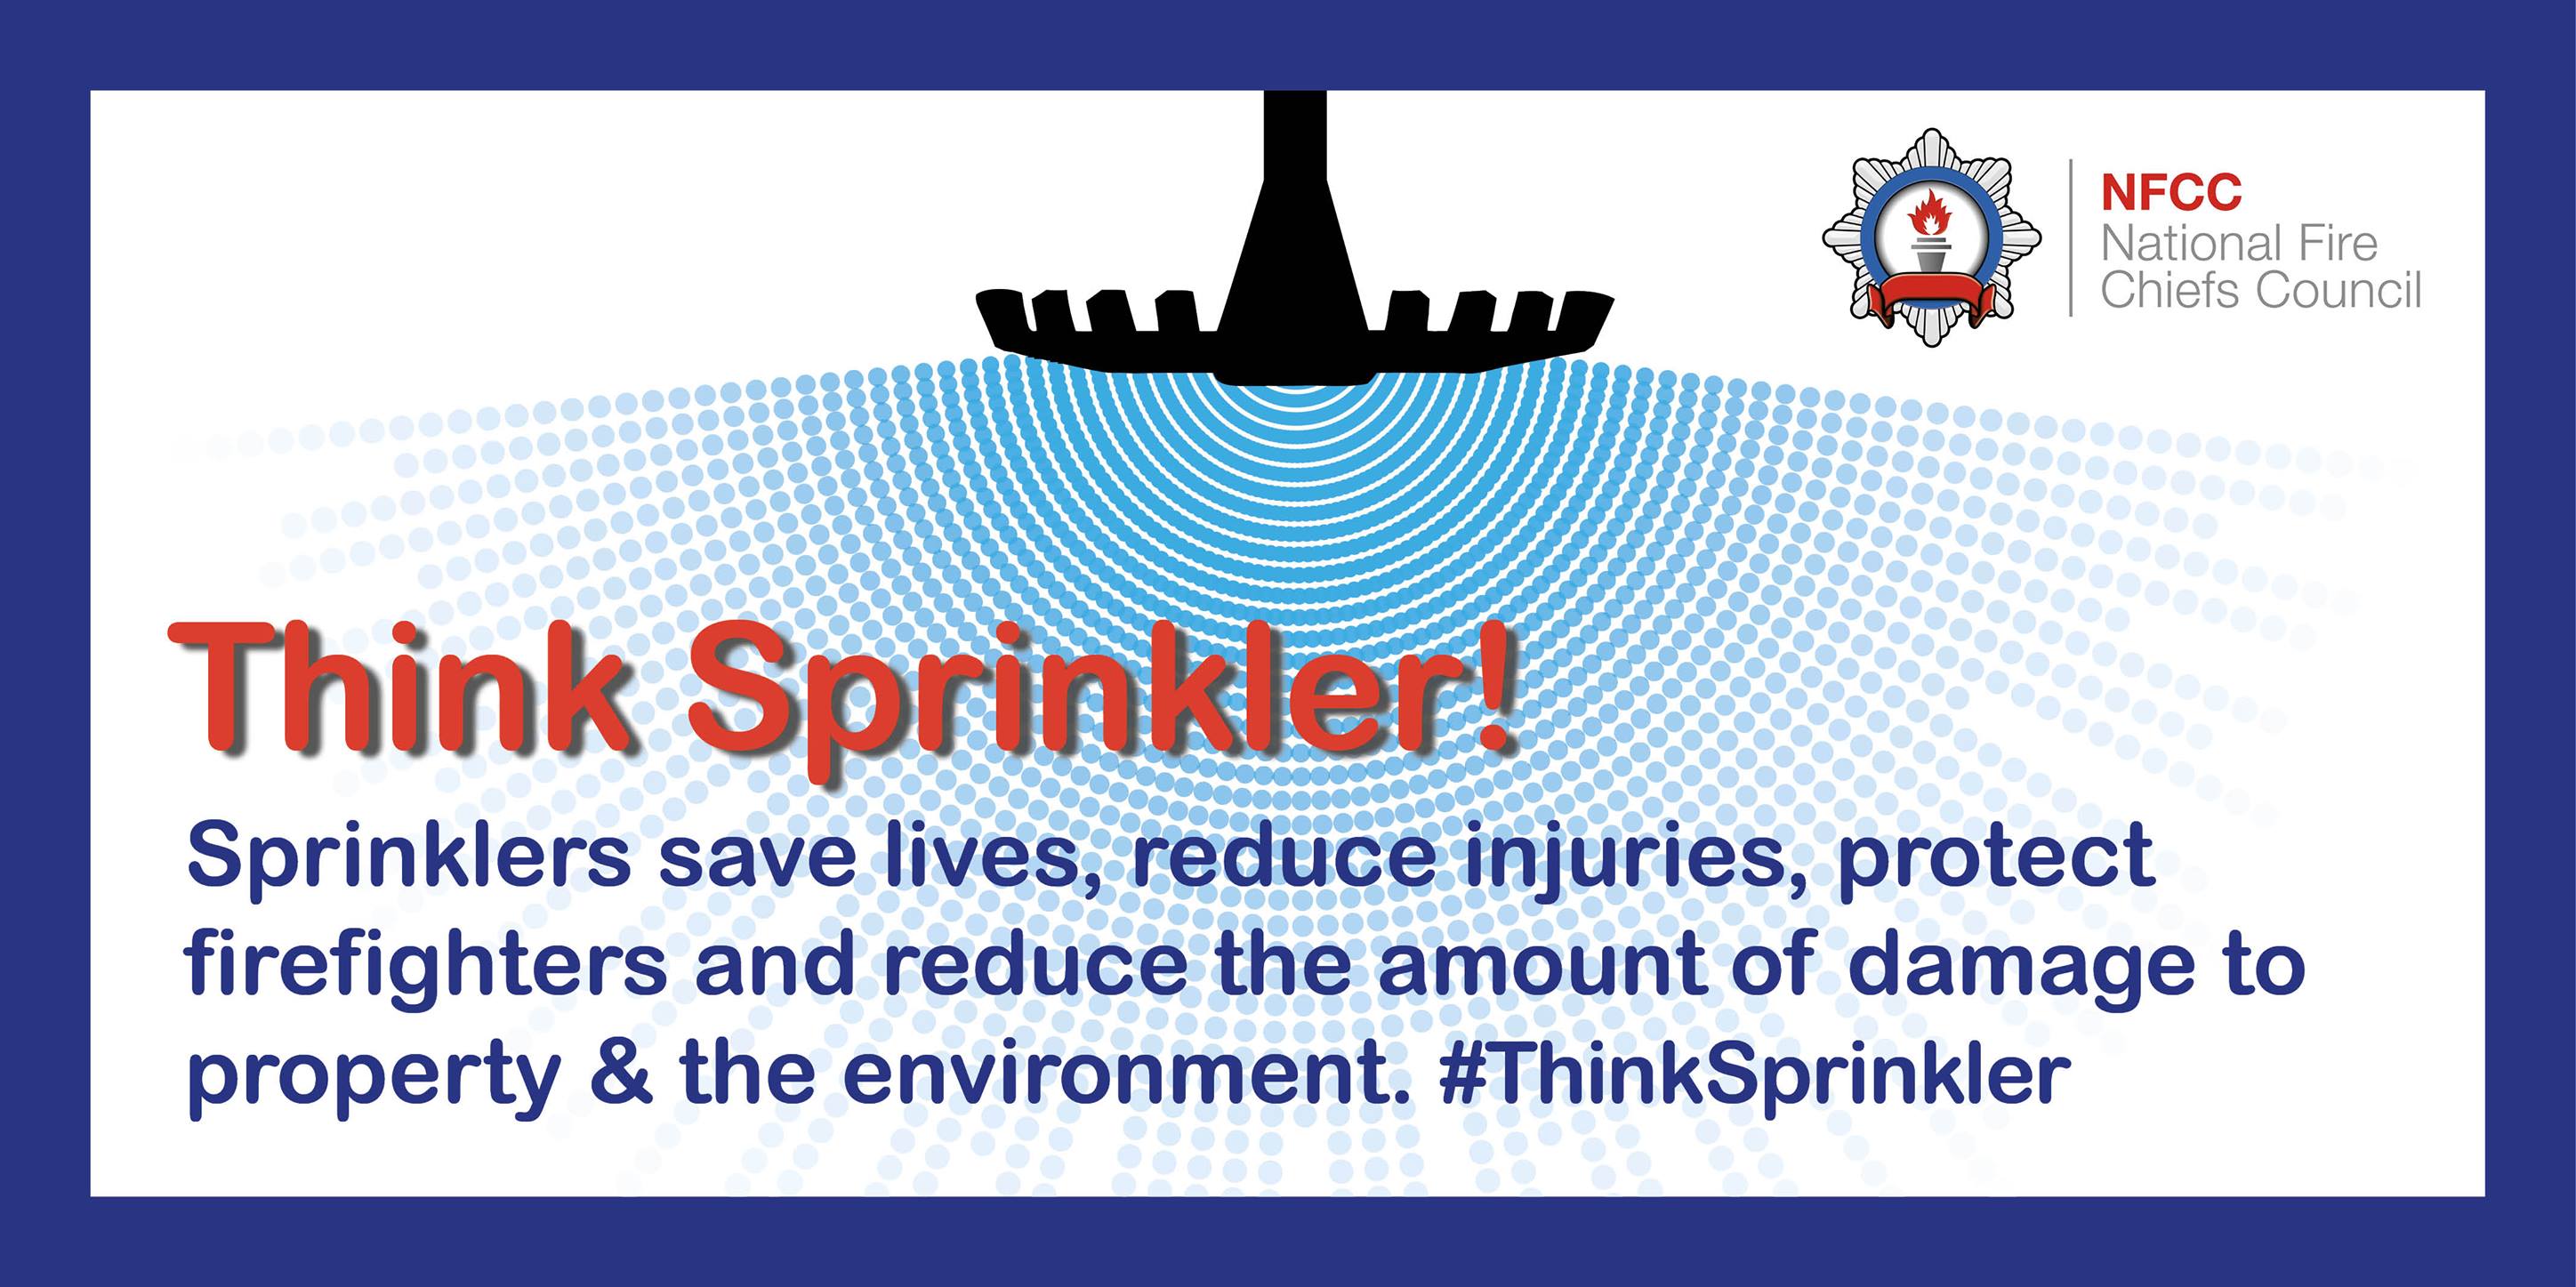 Think sprinkler! Sprinklers save lives, reduce injuries, protect firefighters and reduce the amount of damage to property and the environment